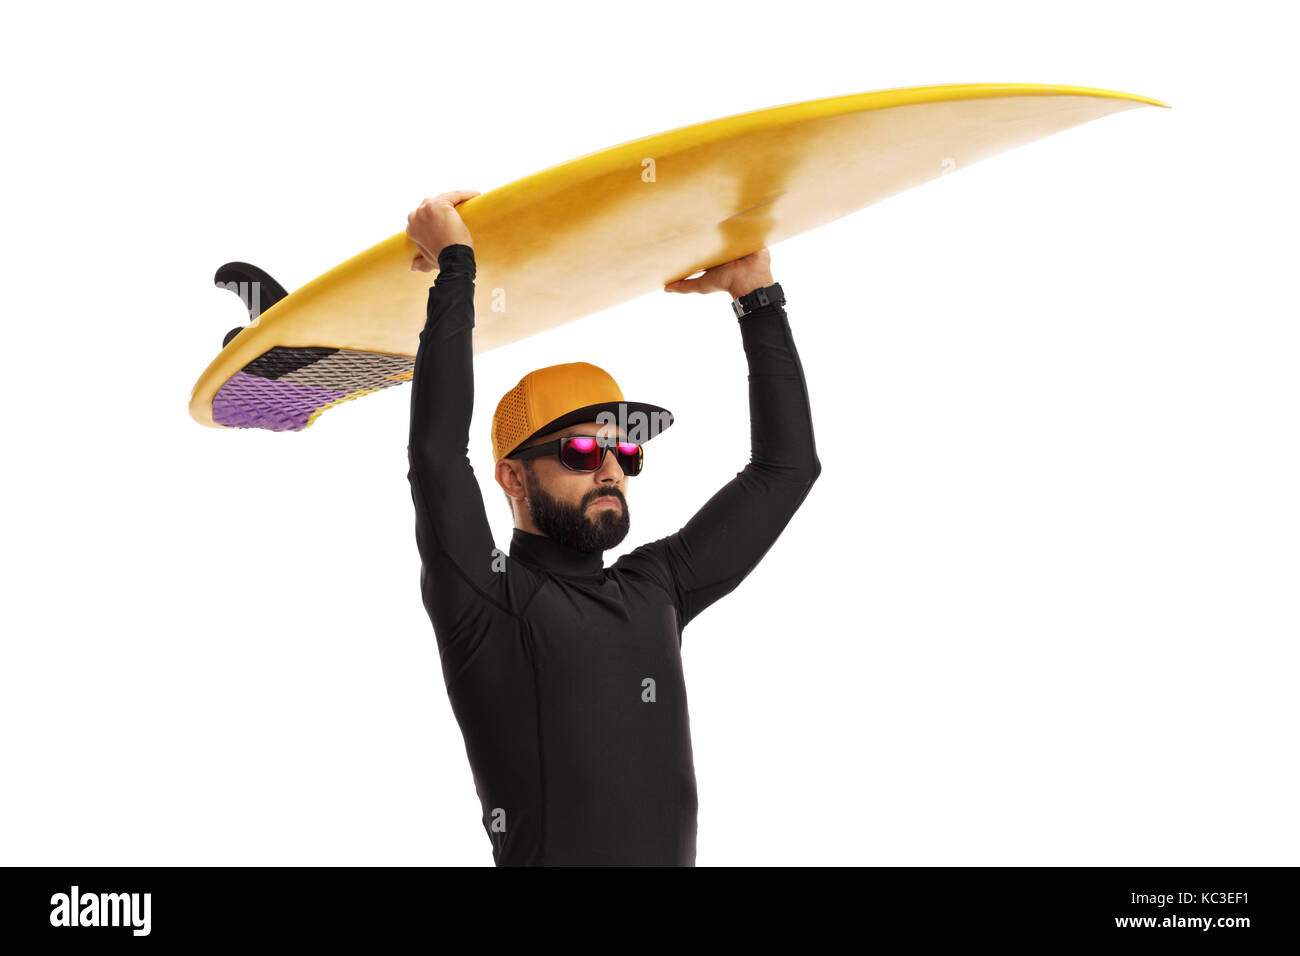 Man in a wetsuit holding a surfboard isolated on white background Stock Photo